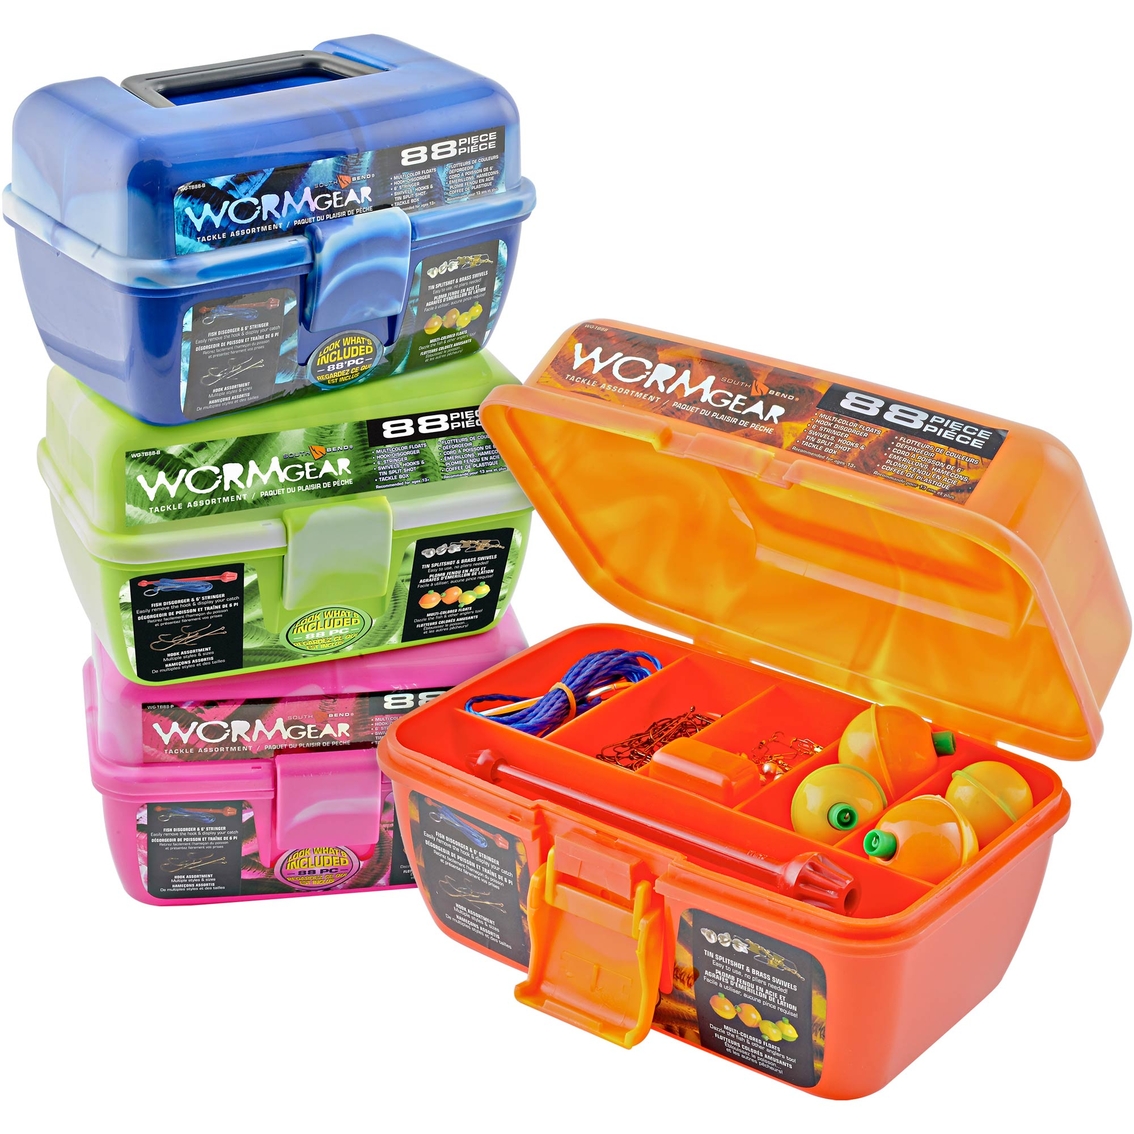 South Bend Wormgear 88 Pc. Loaded Tackle Box